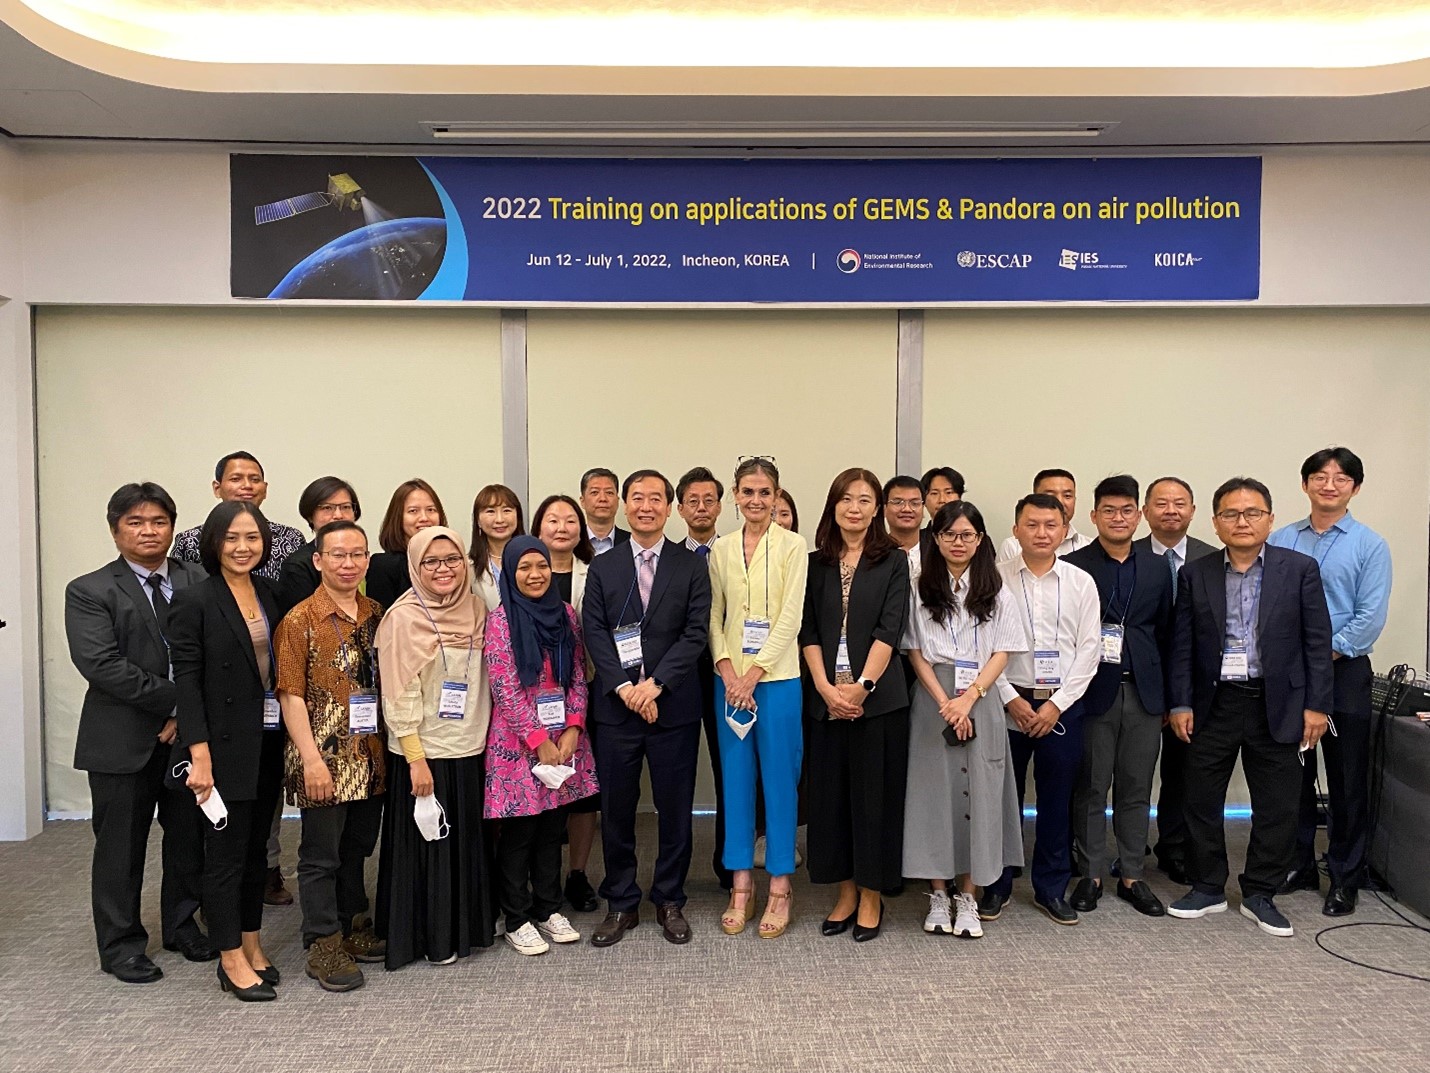 Photo 1: Training for participants from Asian countries in the integration of GEMS satellite-derived data and Pandora instrument for monitoring air pollution at the Environmental Satellite Center of the National Environment Research Institute in Incheon, Republic of Korea.